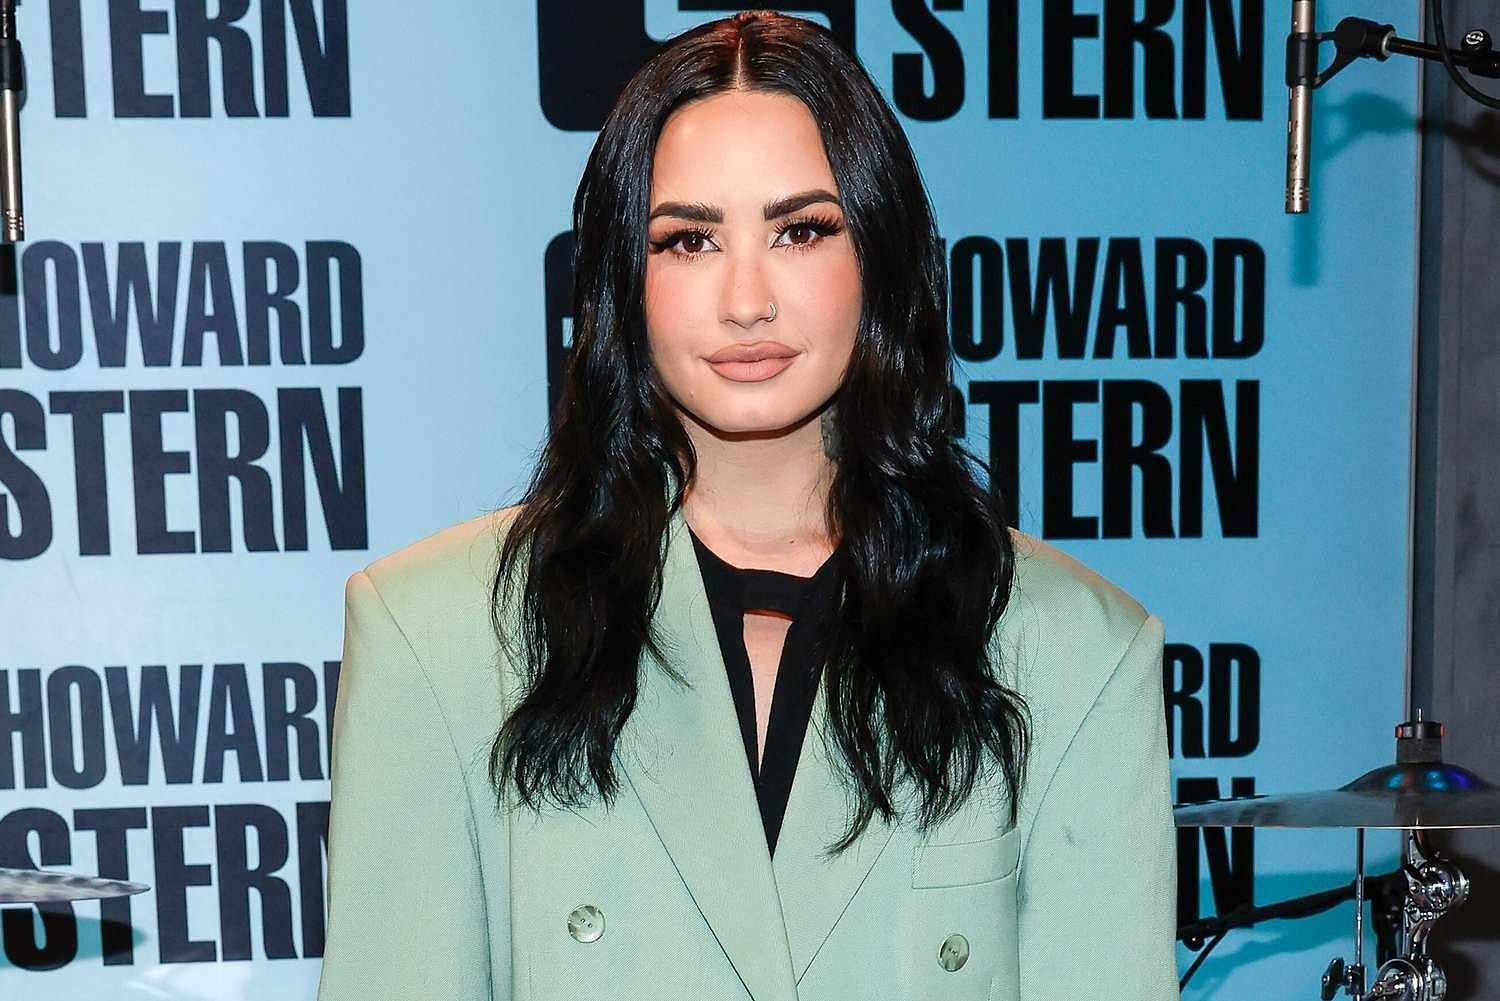 Demi Lovato in Celebrities with Mental Illness (Image via Getty Images)